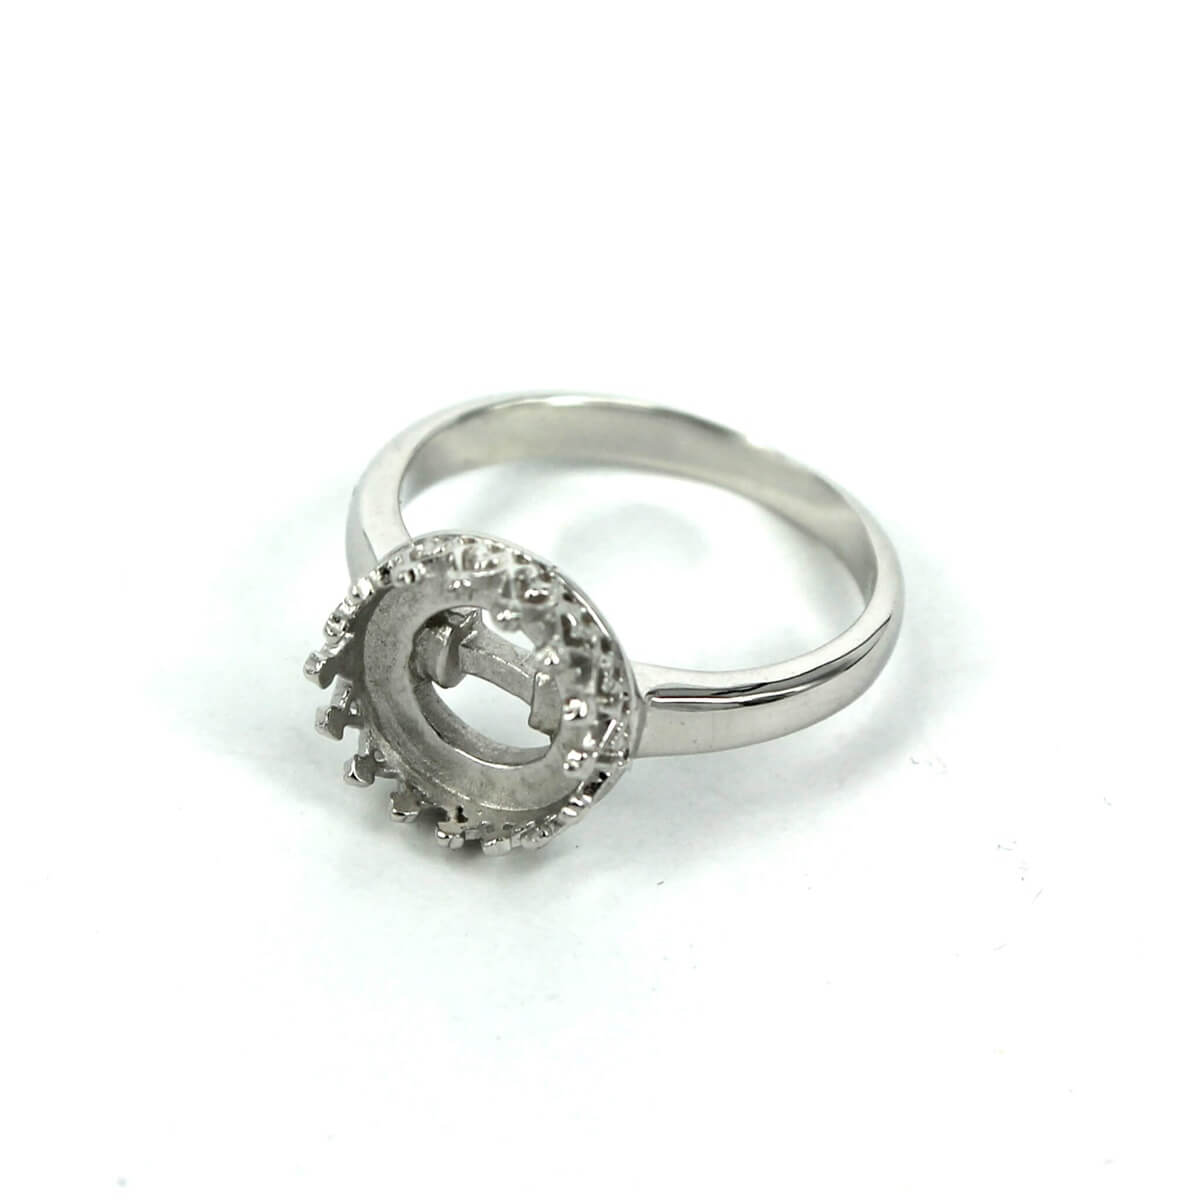 Gallery Ring with Round Bezel Mounting in Sterling Silver 10mm 